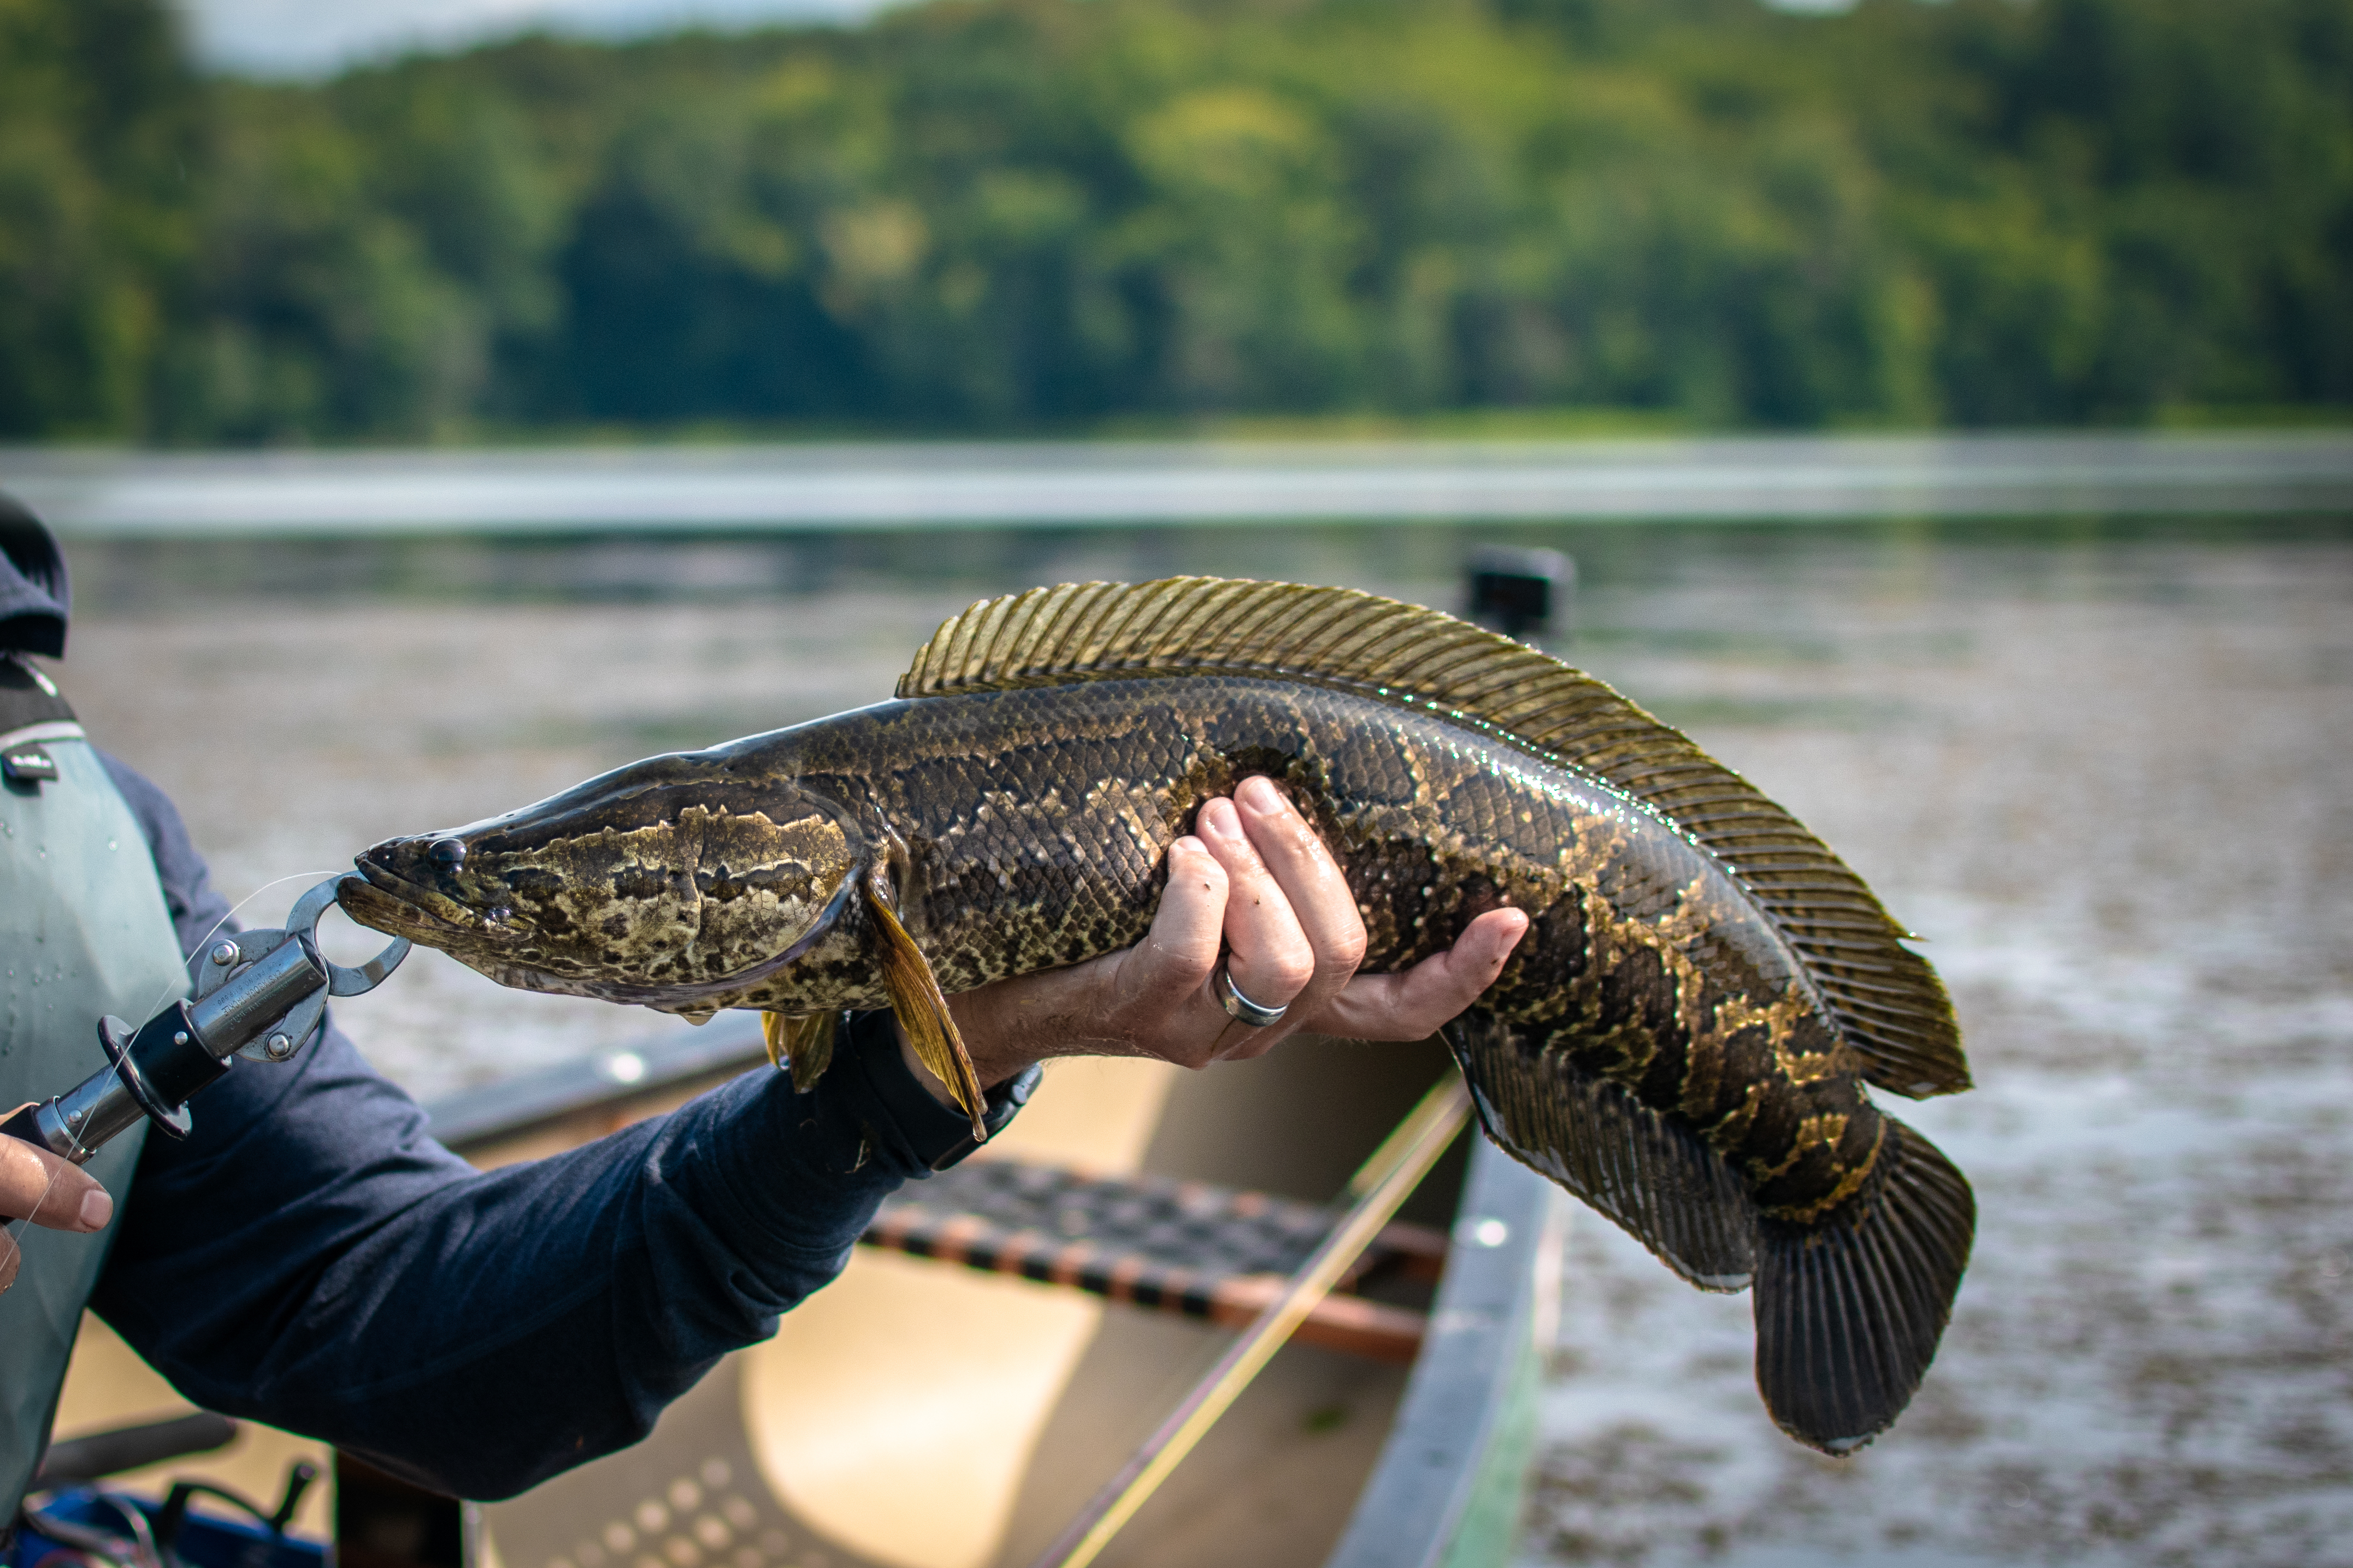 Snakehead Fish: The Invasive Species and Its Spreading Range